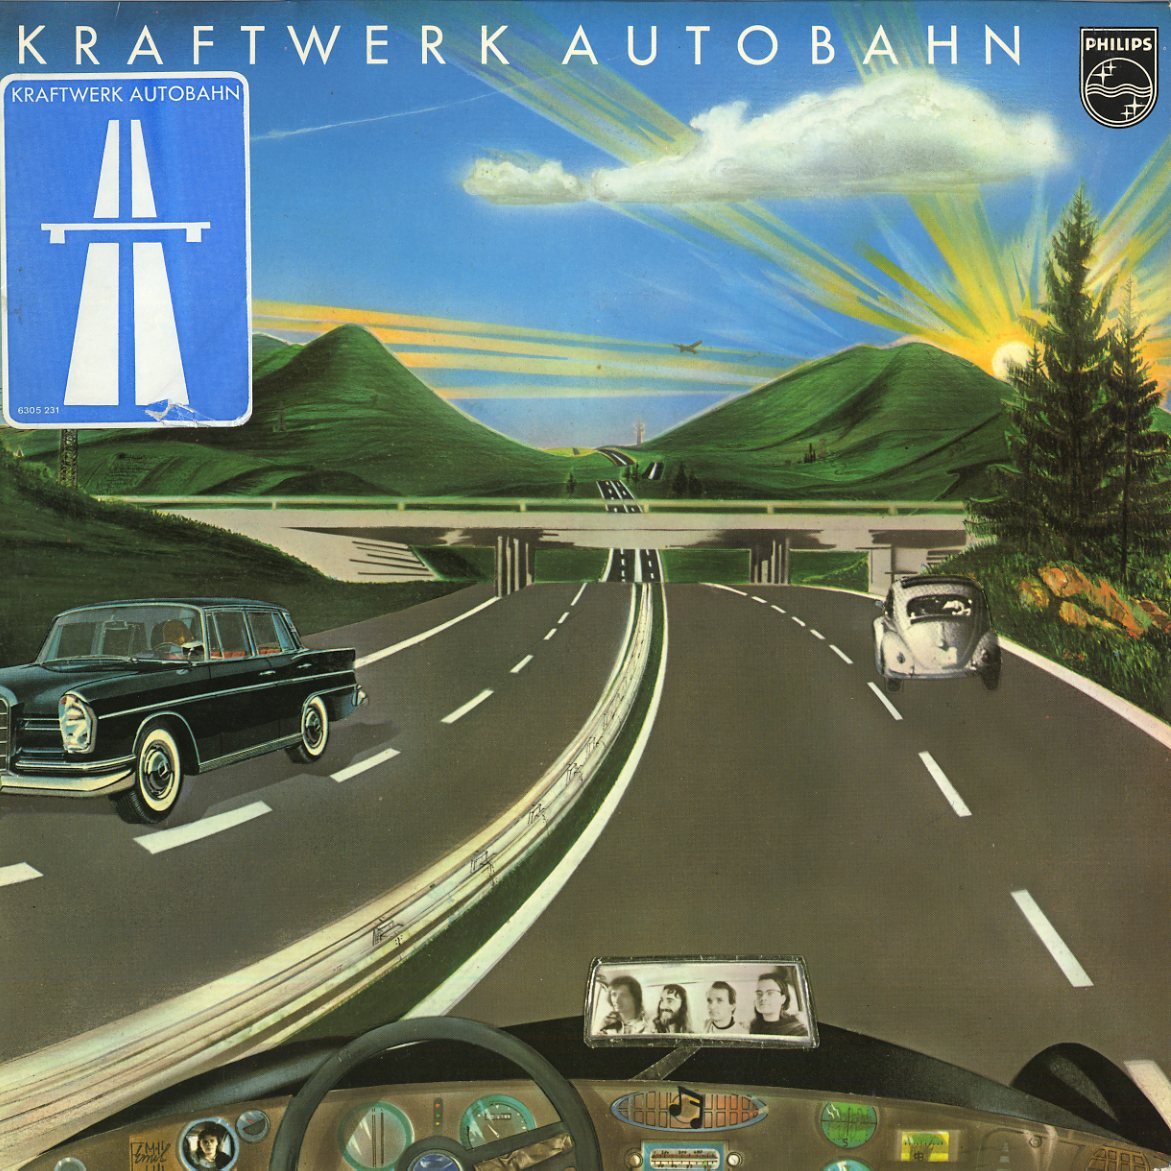 NEWS Rise Of The Robots | Autobahn Reaches 49 Years this month!